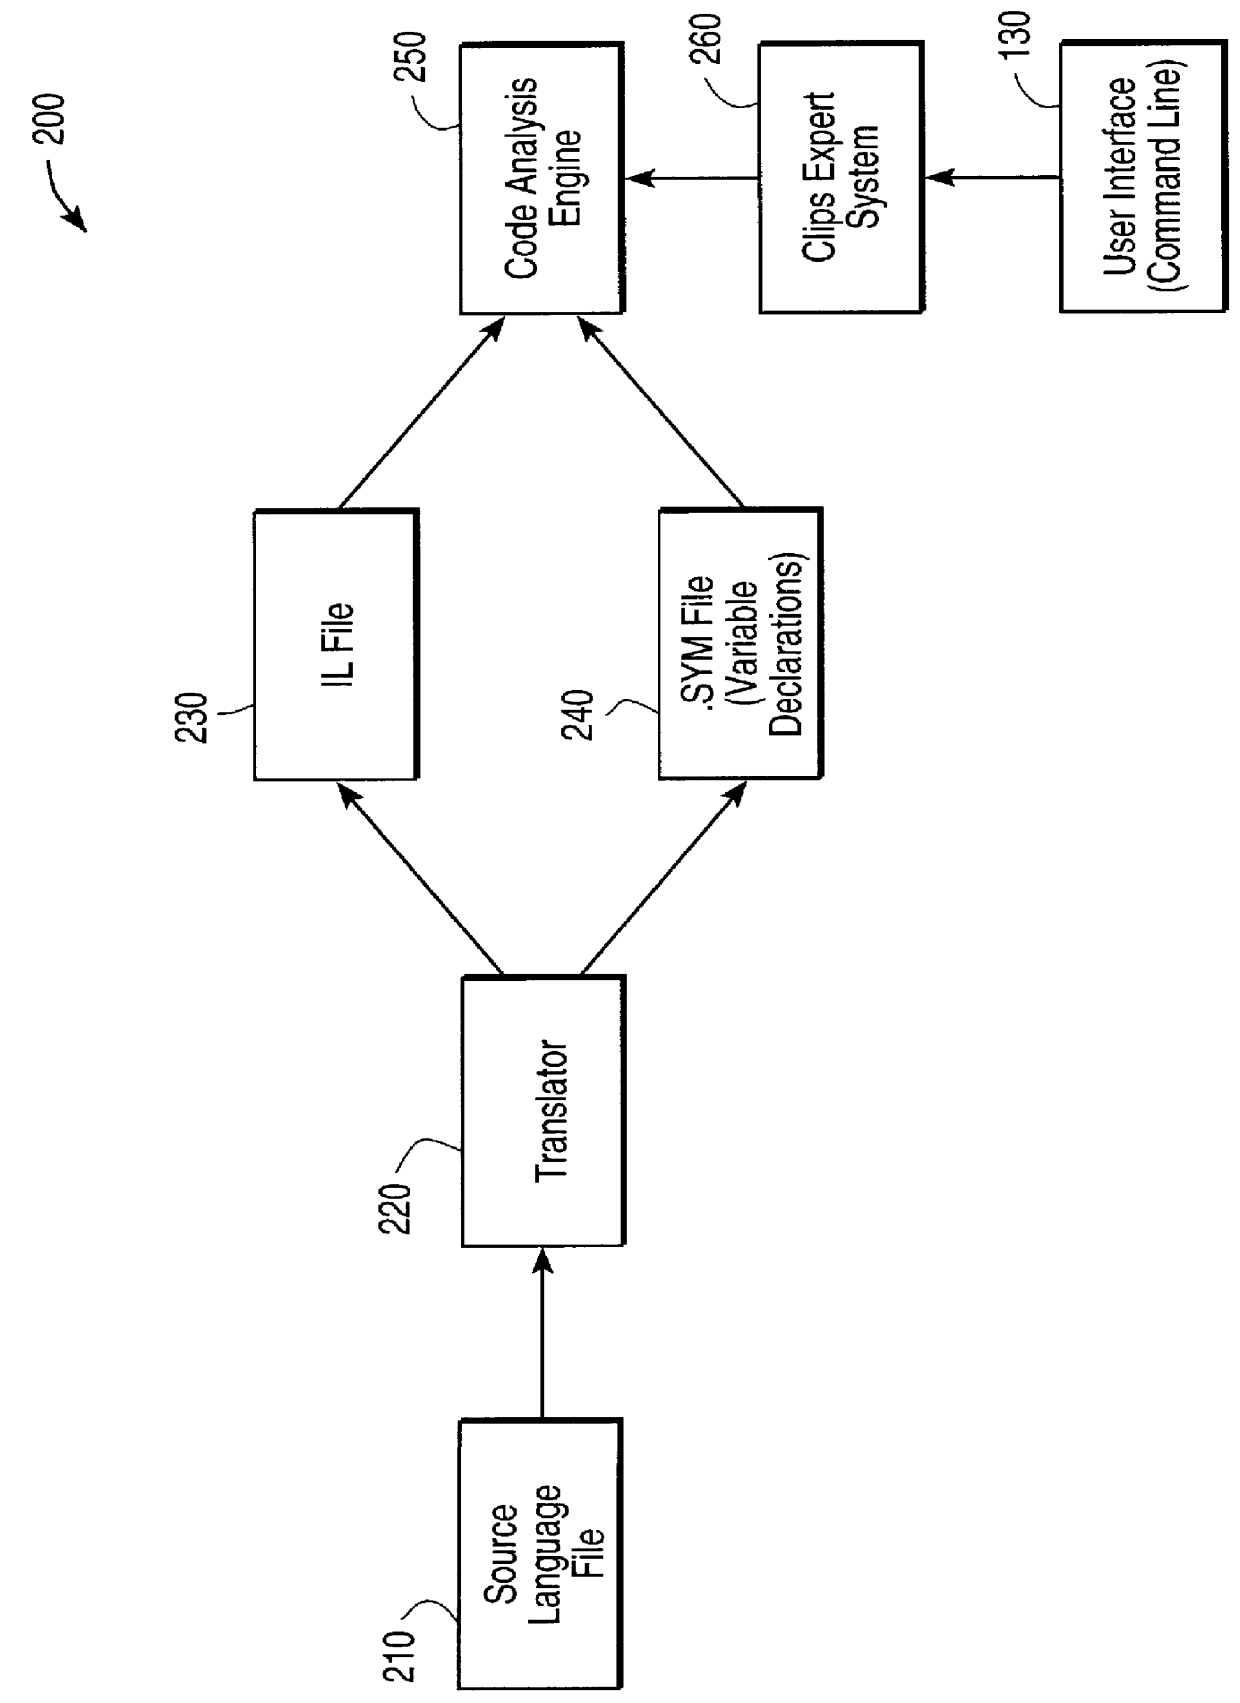 Method and apparatus for analyzing computer code using weakest precondition